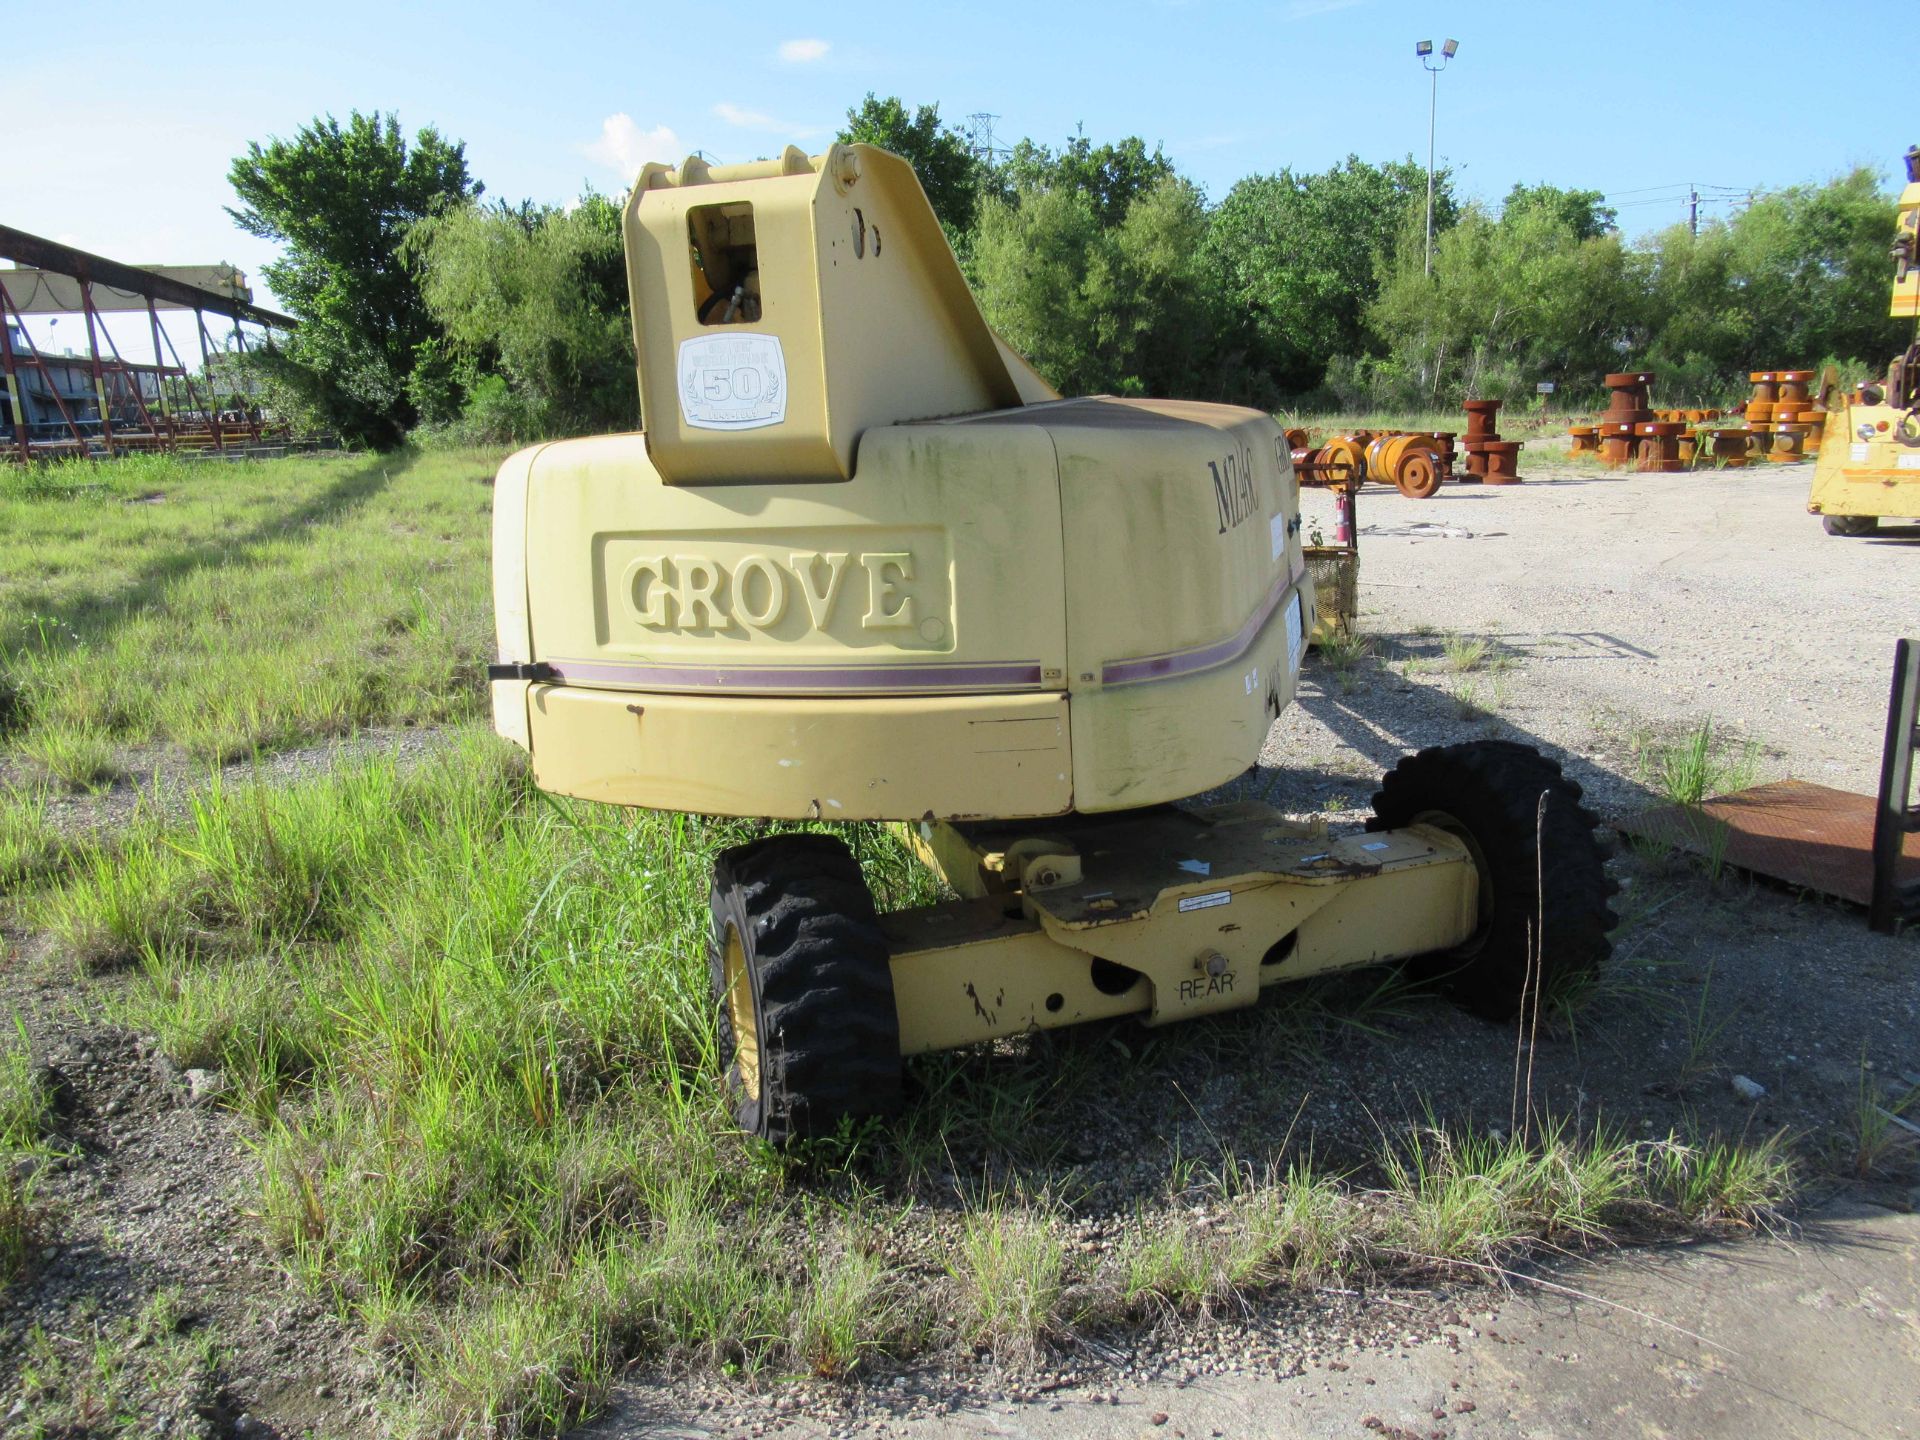 GROVE MDL. MZ46C MANLIFT, new 1997, 40’ max. travel height, 500 lbs. max load. Steel toe shoes, - Image 3 of 7